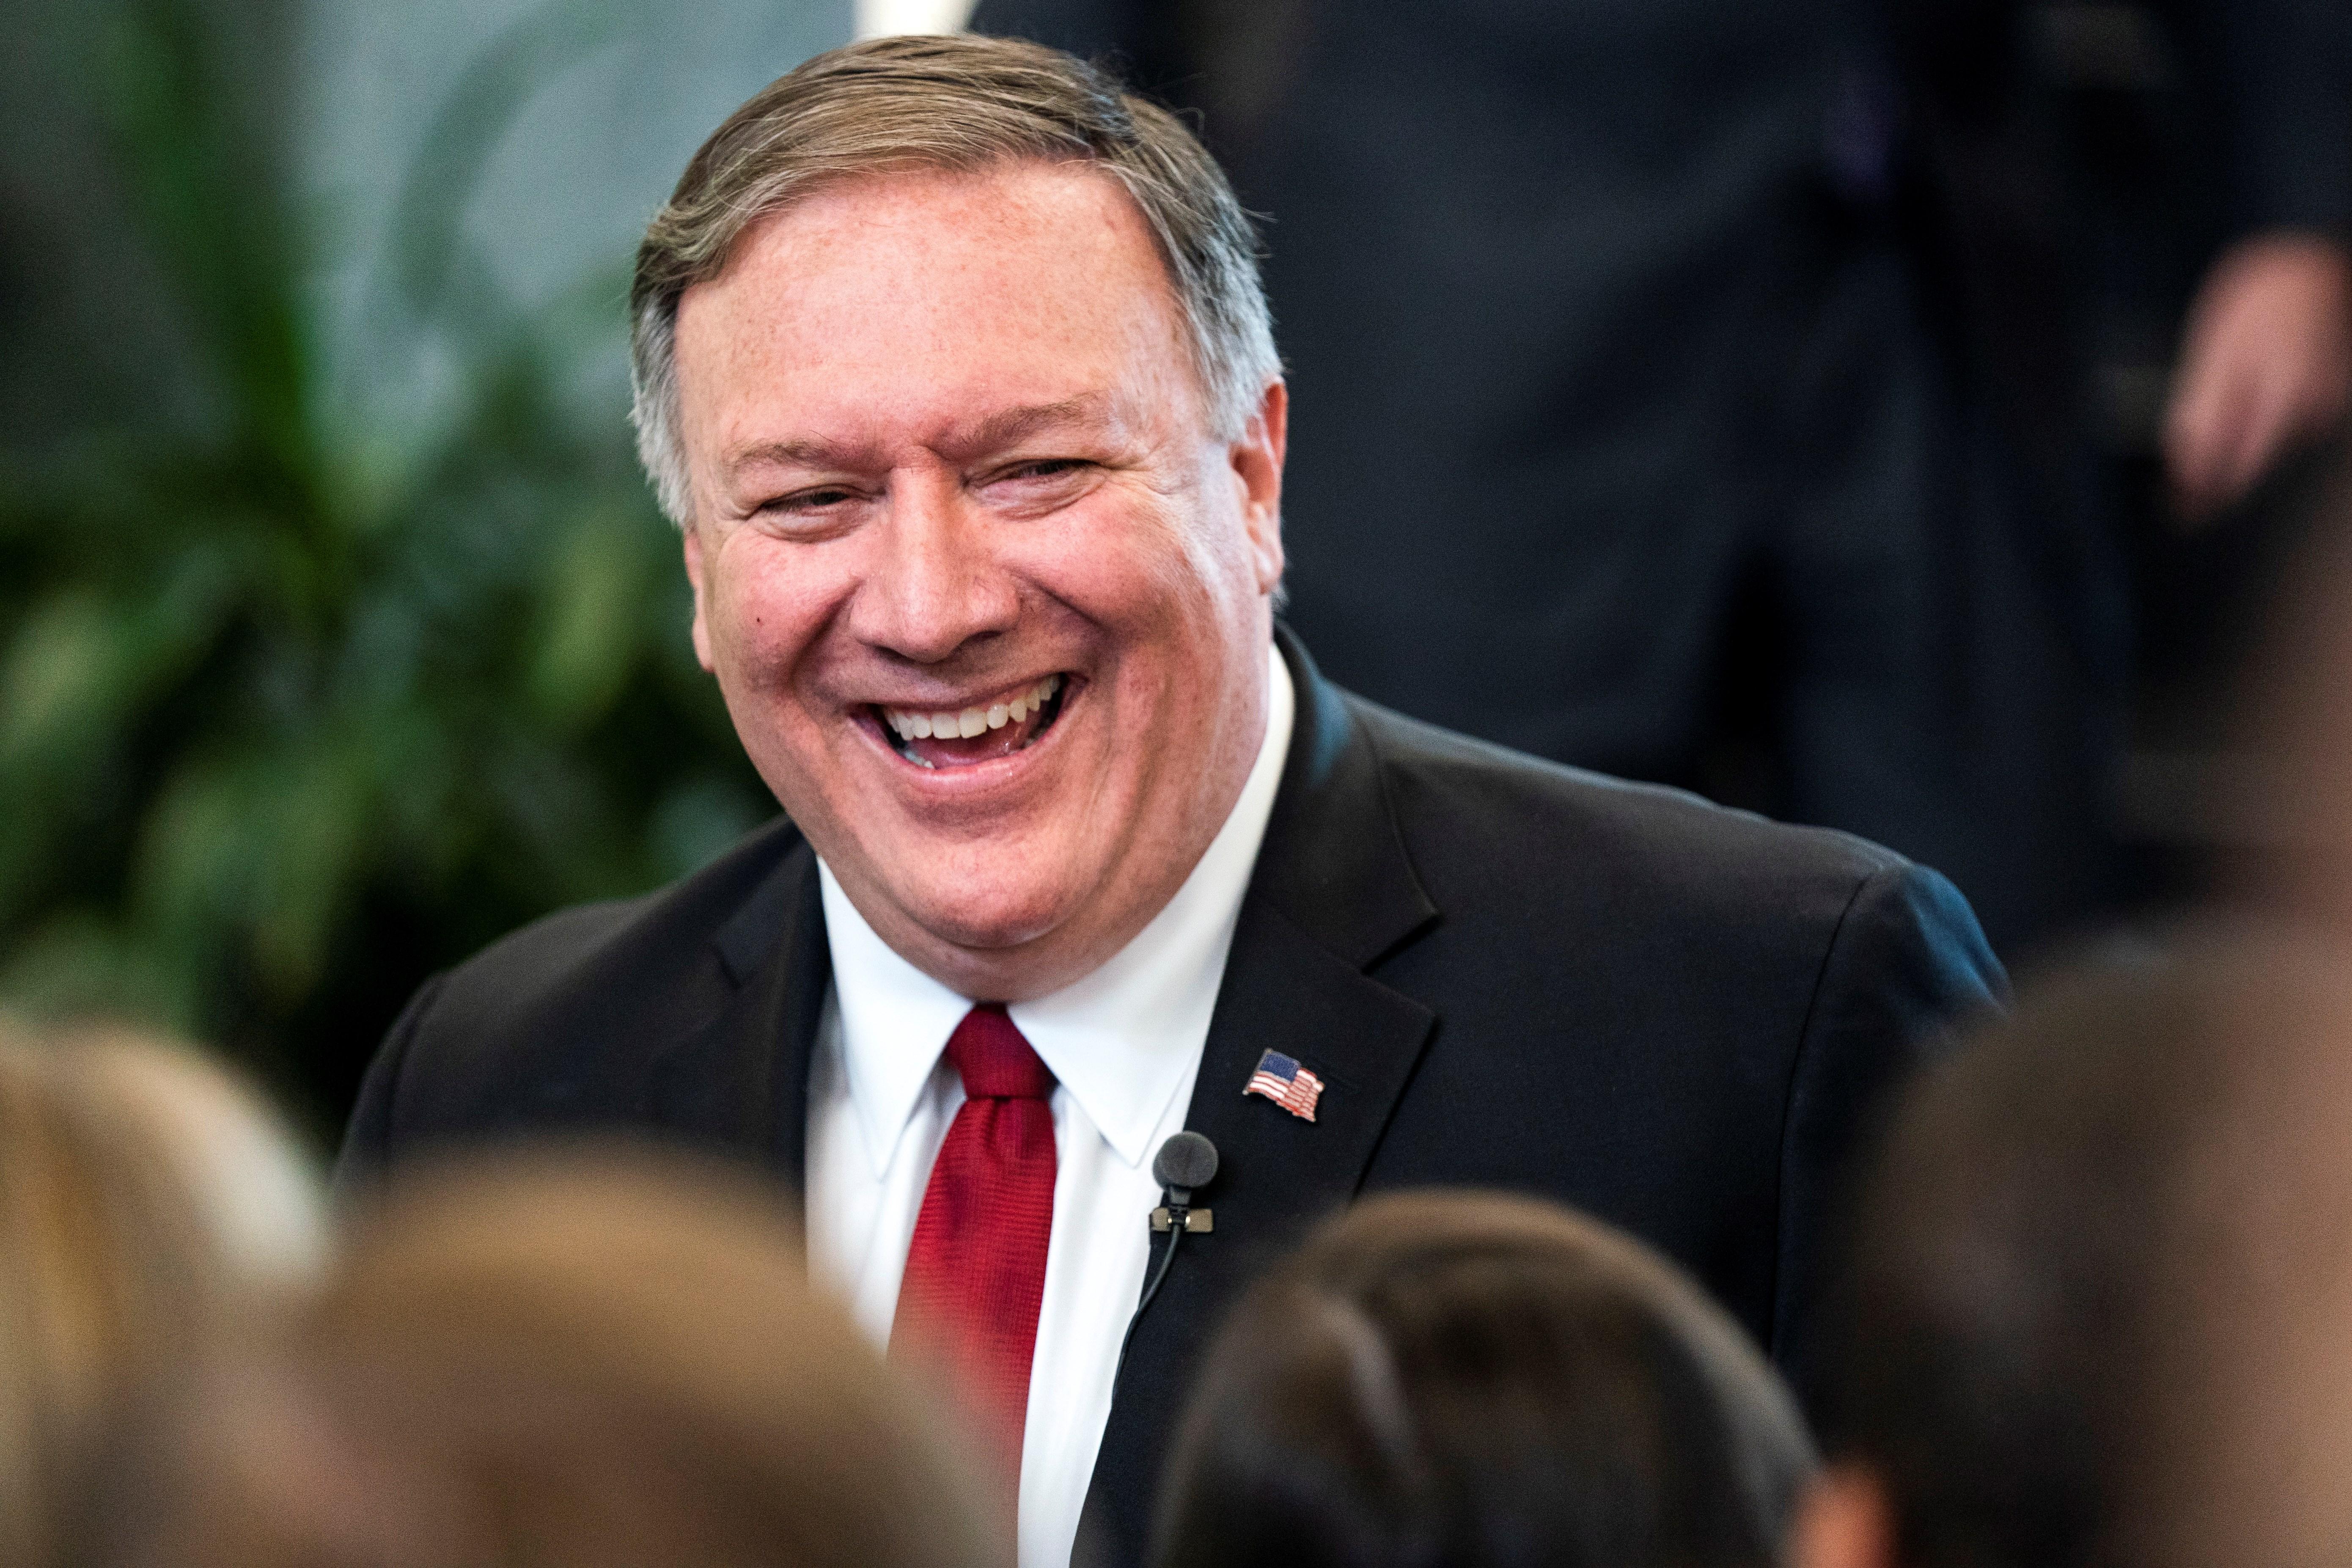 US Secretary of State Mike Pompeo sends saintly greetings in Catalan